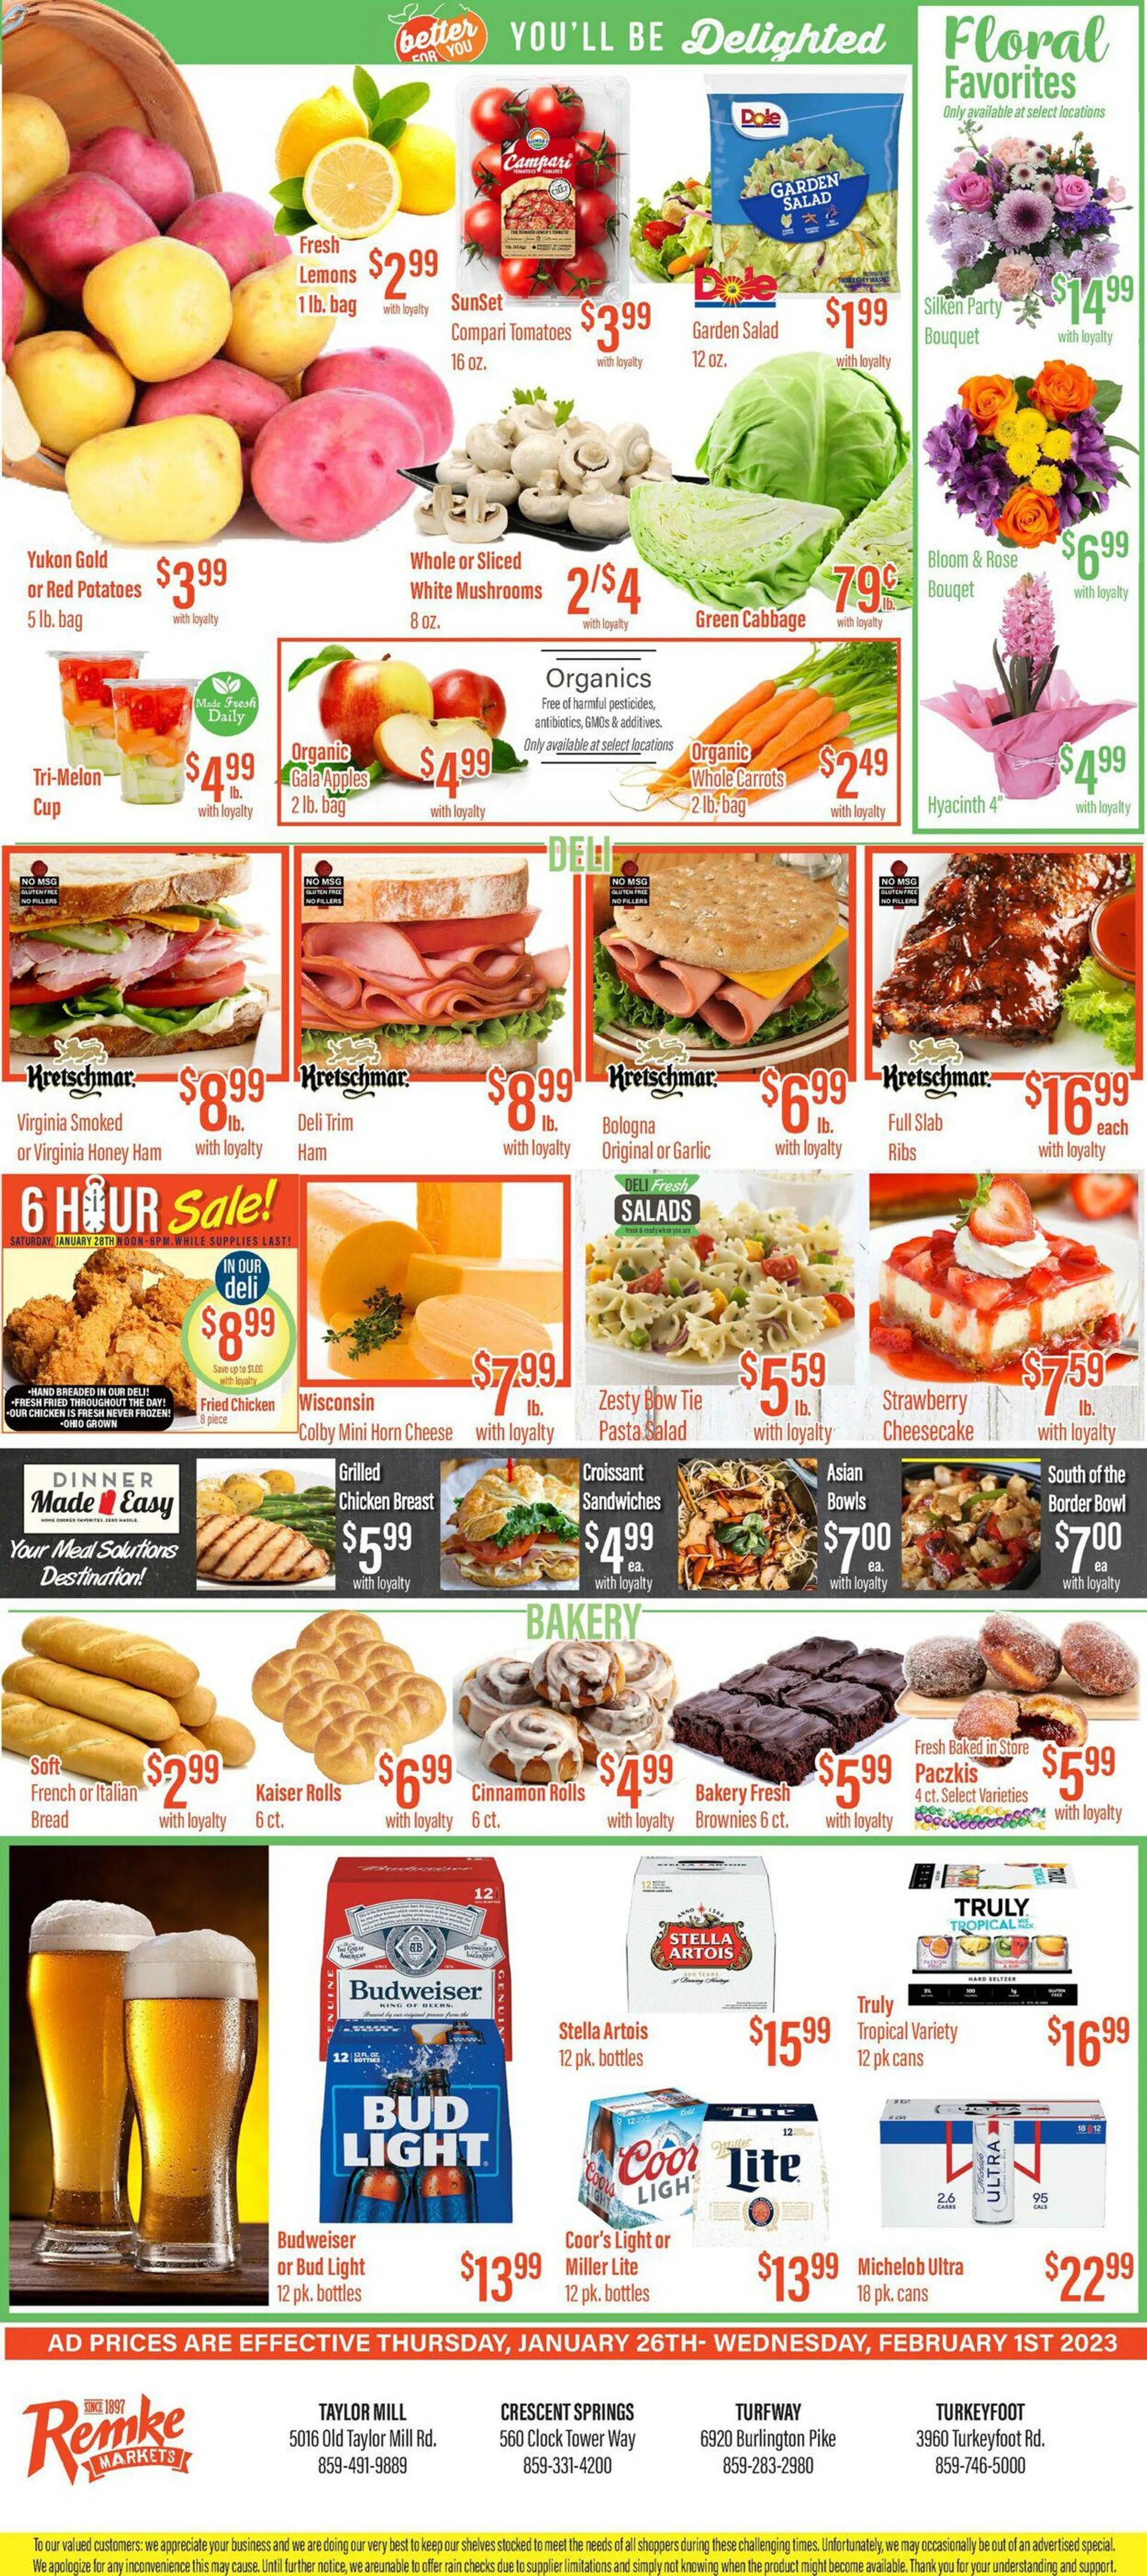 Remke Markets Current weekly ad - 5